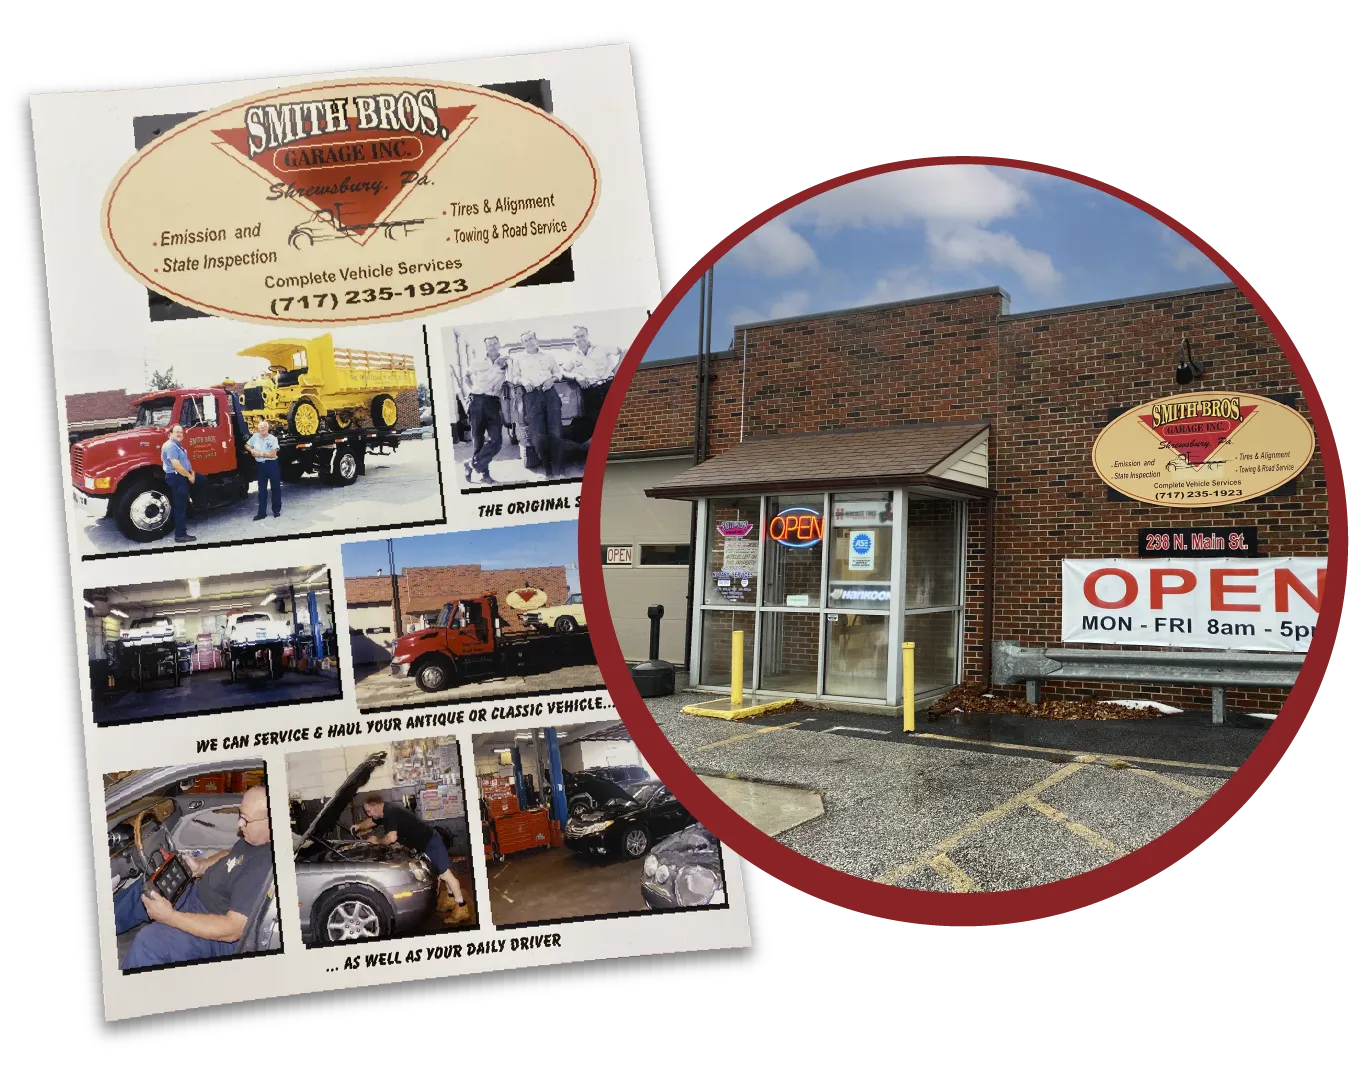 Smith Bros Garage old flyer and office entrance collage